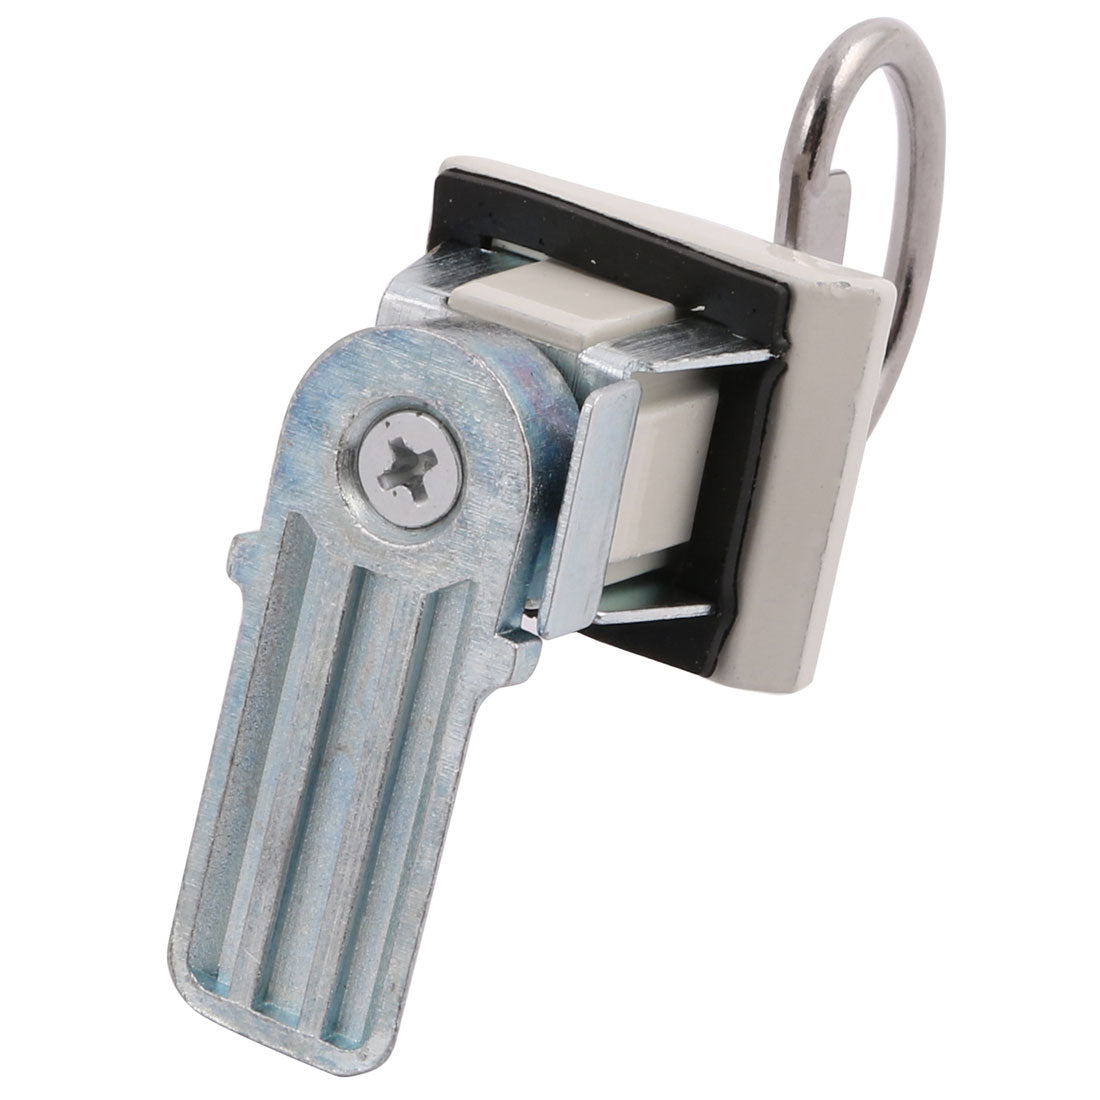 uxcell Uxcell 34mm x 30mm Cabinet Square Panel Quarter Turn Latch Safety Cam Lock w Key